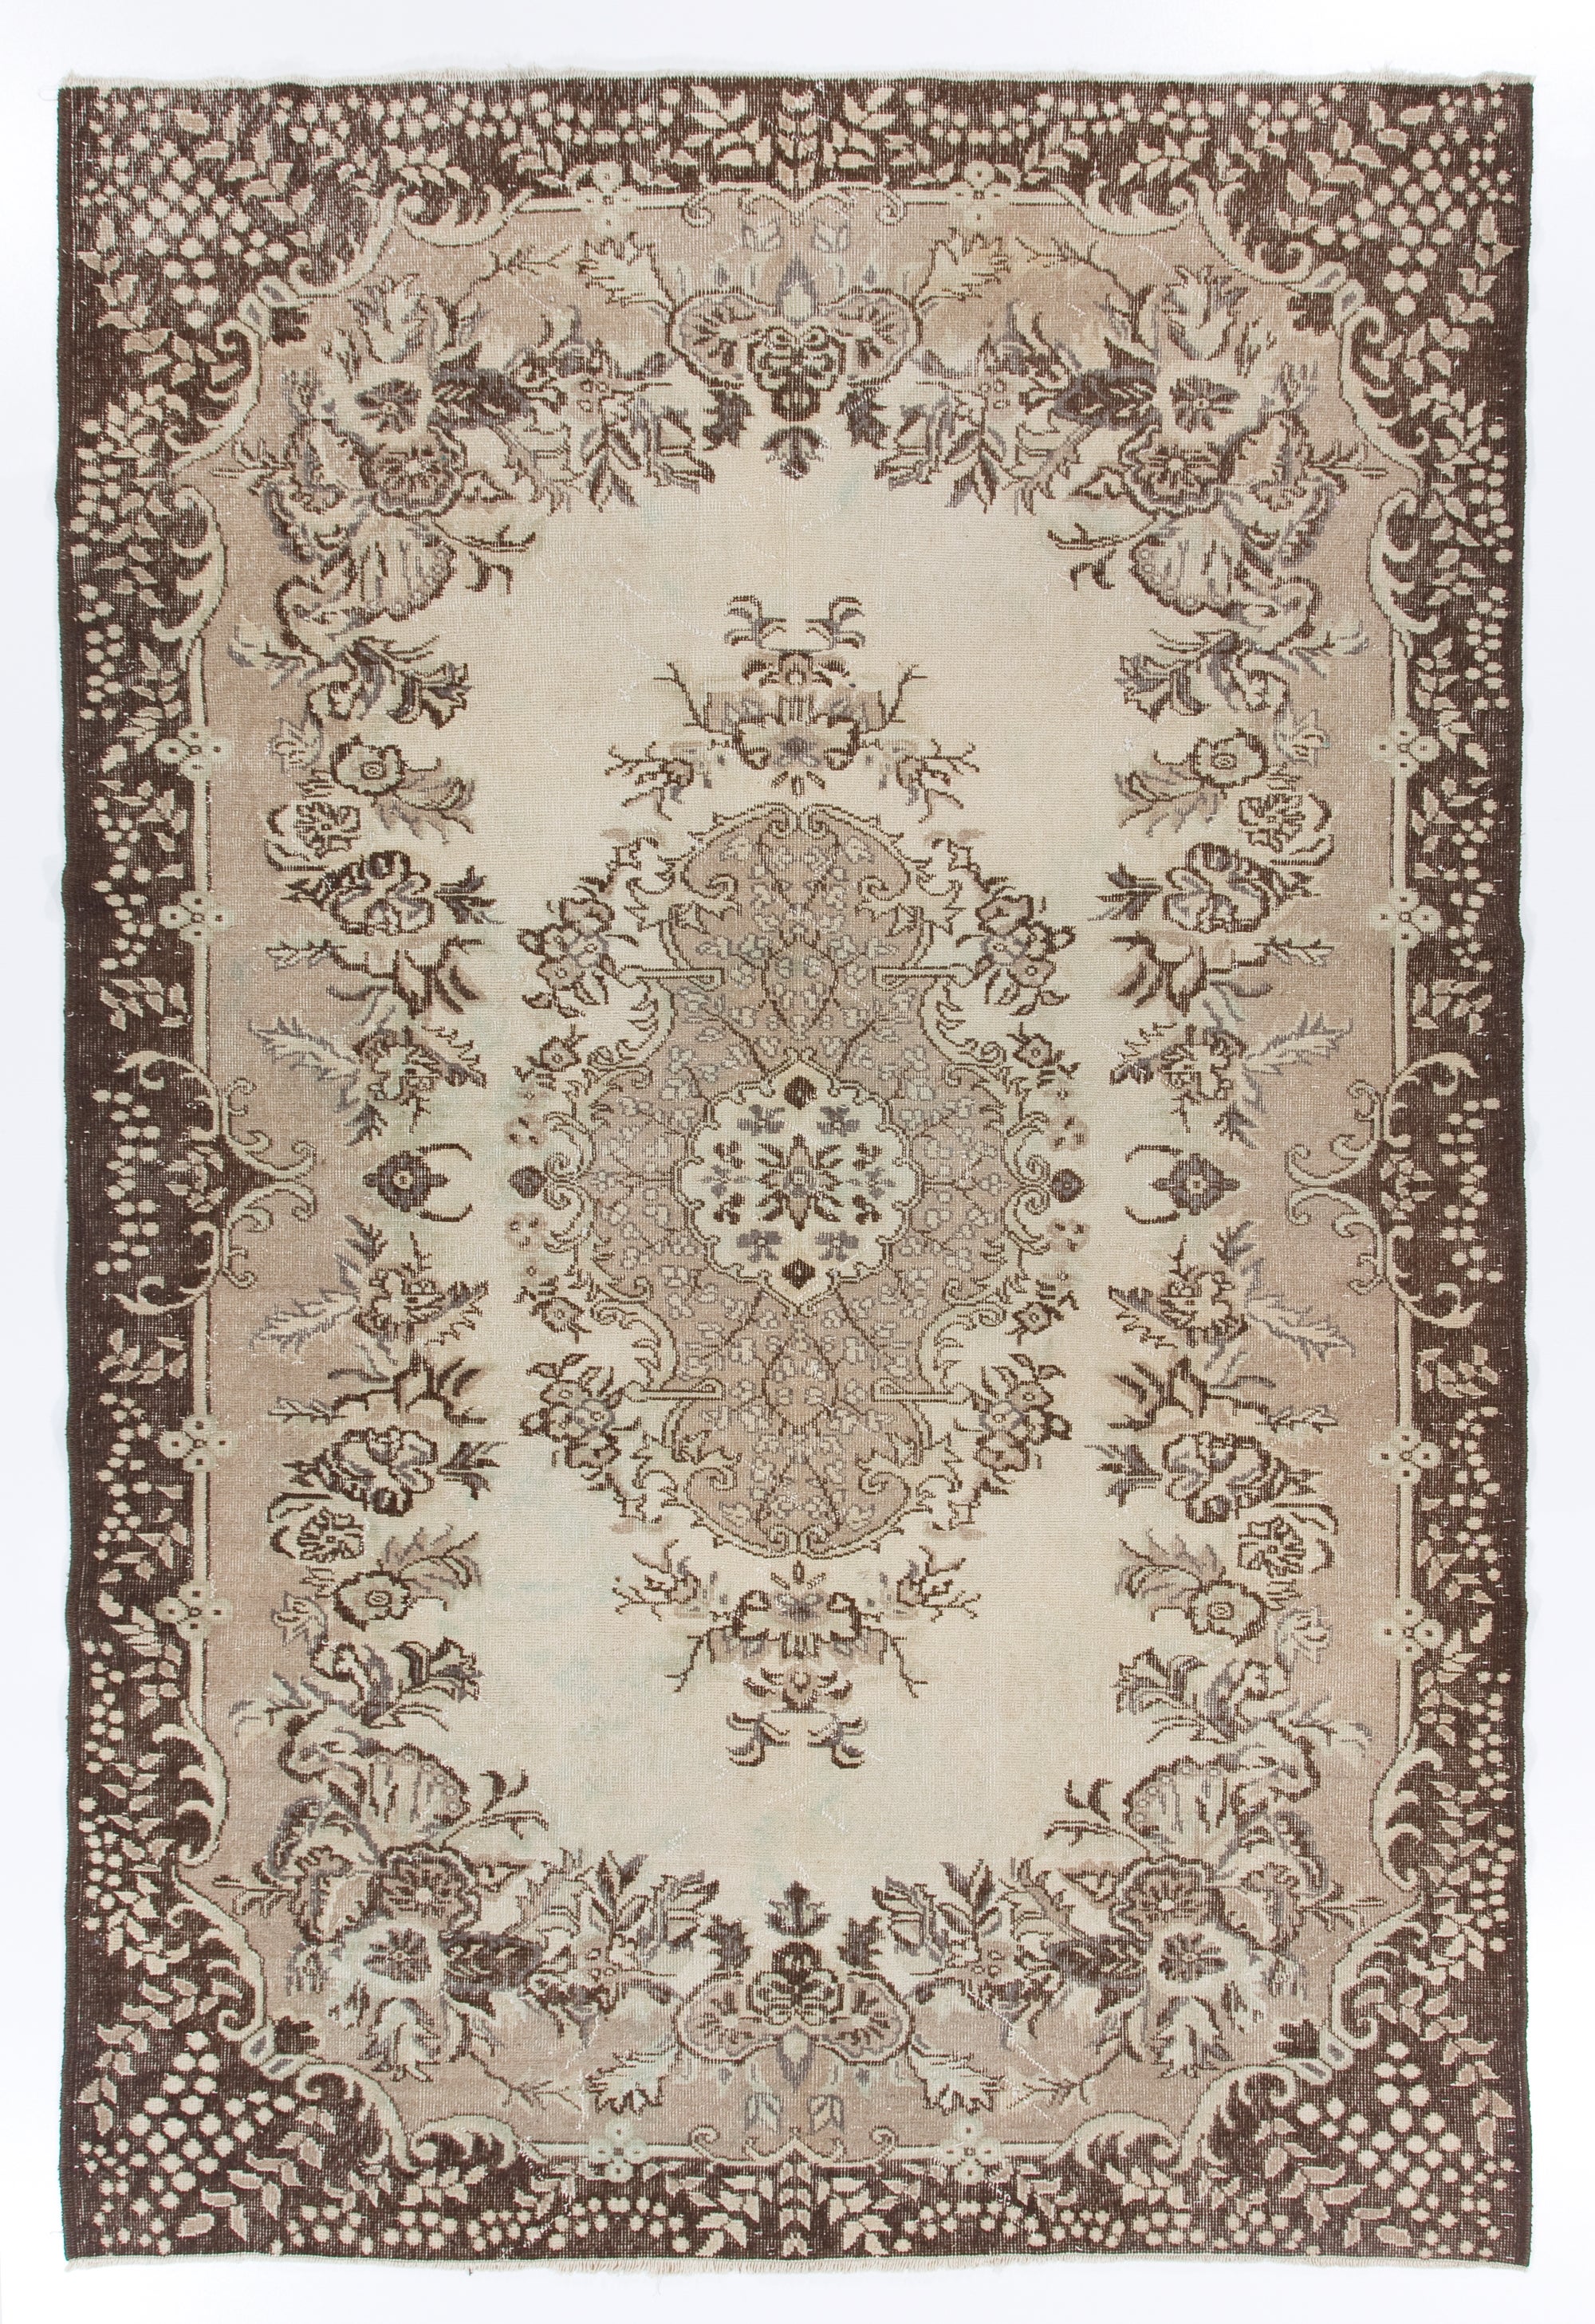 6.8x10.1 Ft Hand-Made Vintage Garden Design Traditional Wool Rug from Turkey For Sale